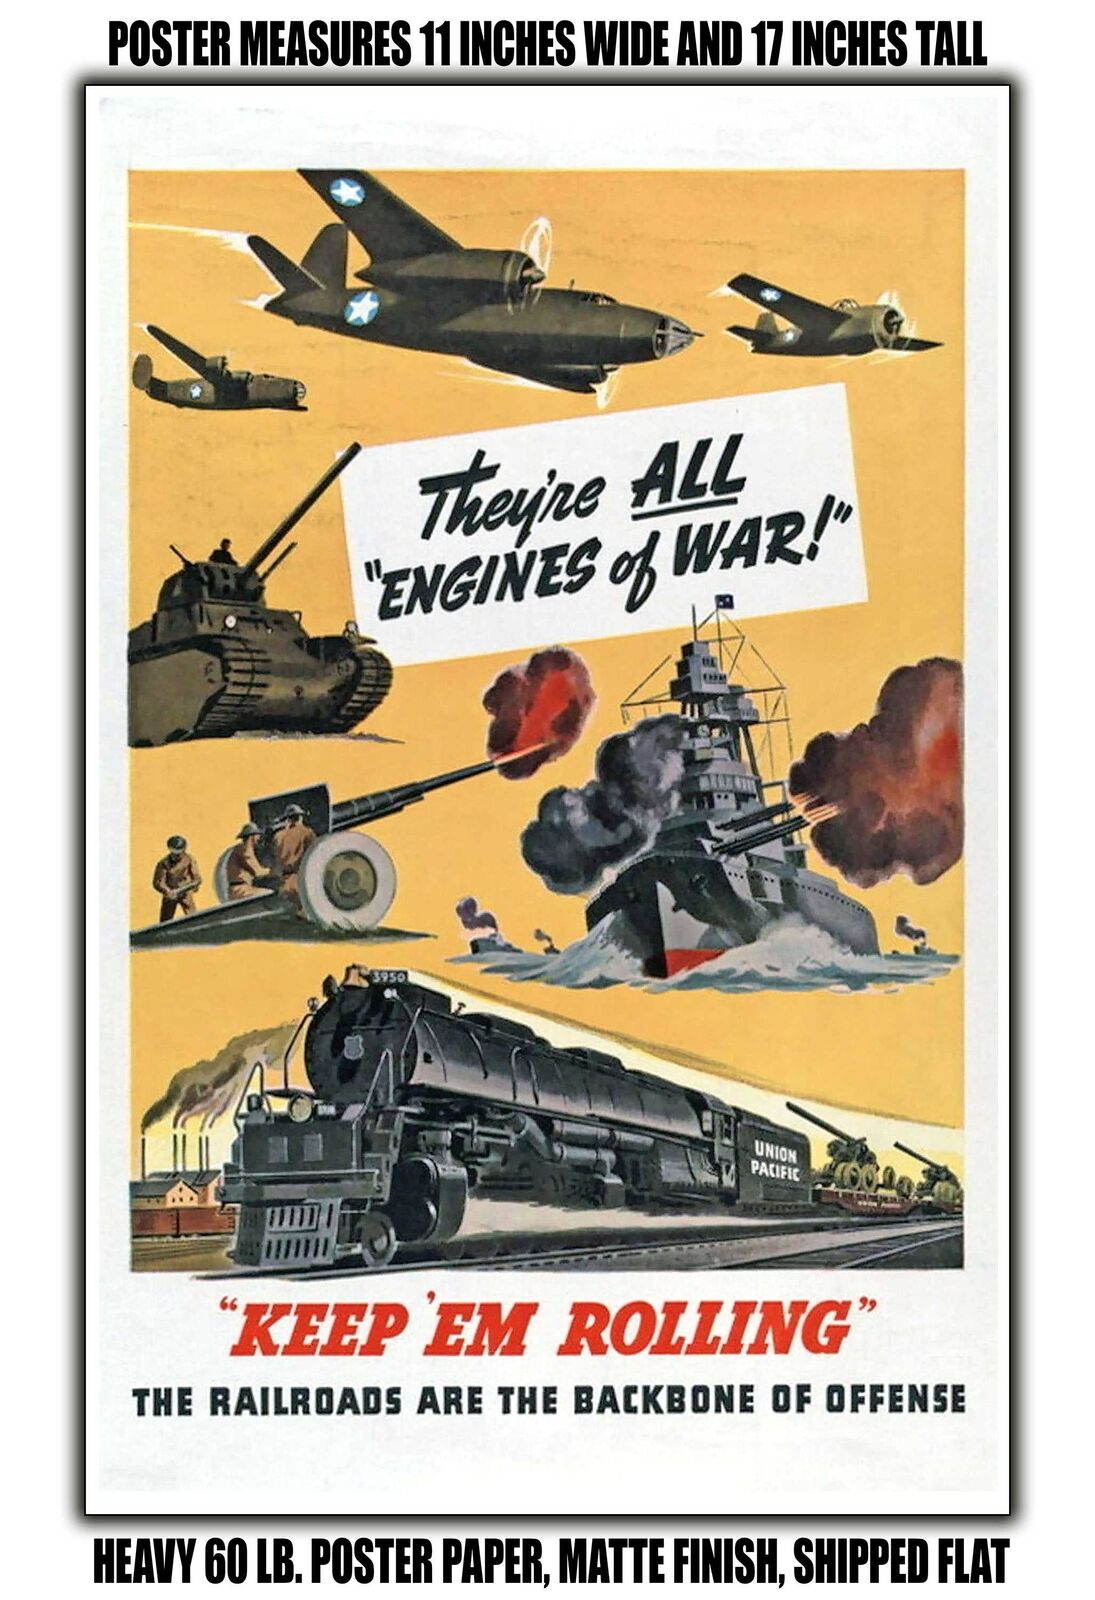 11x17 POSTER - 1944 Union Pacific